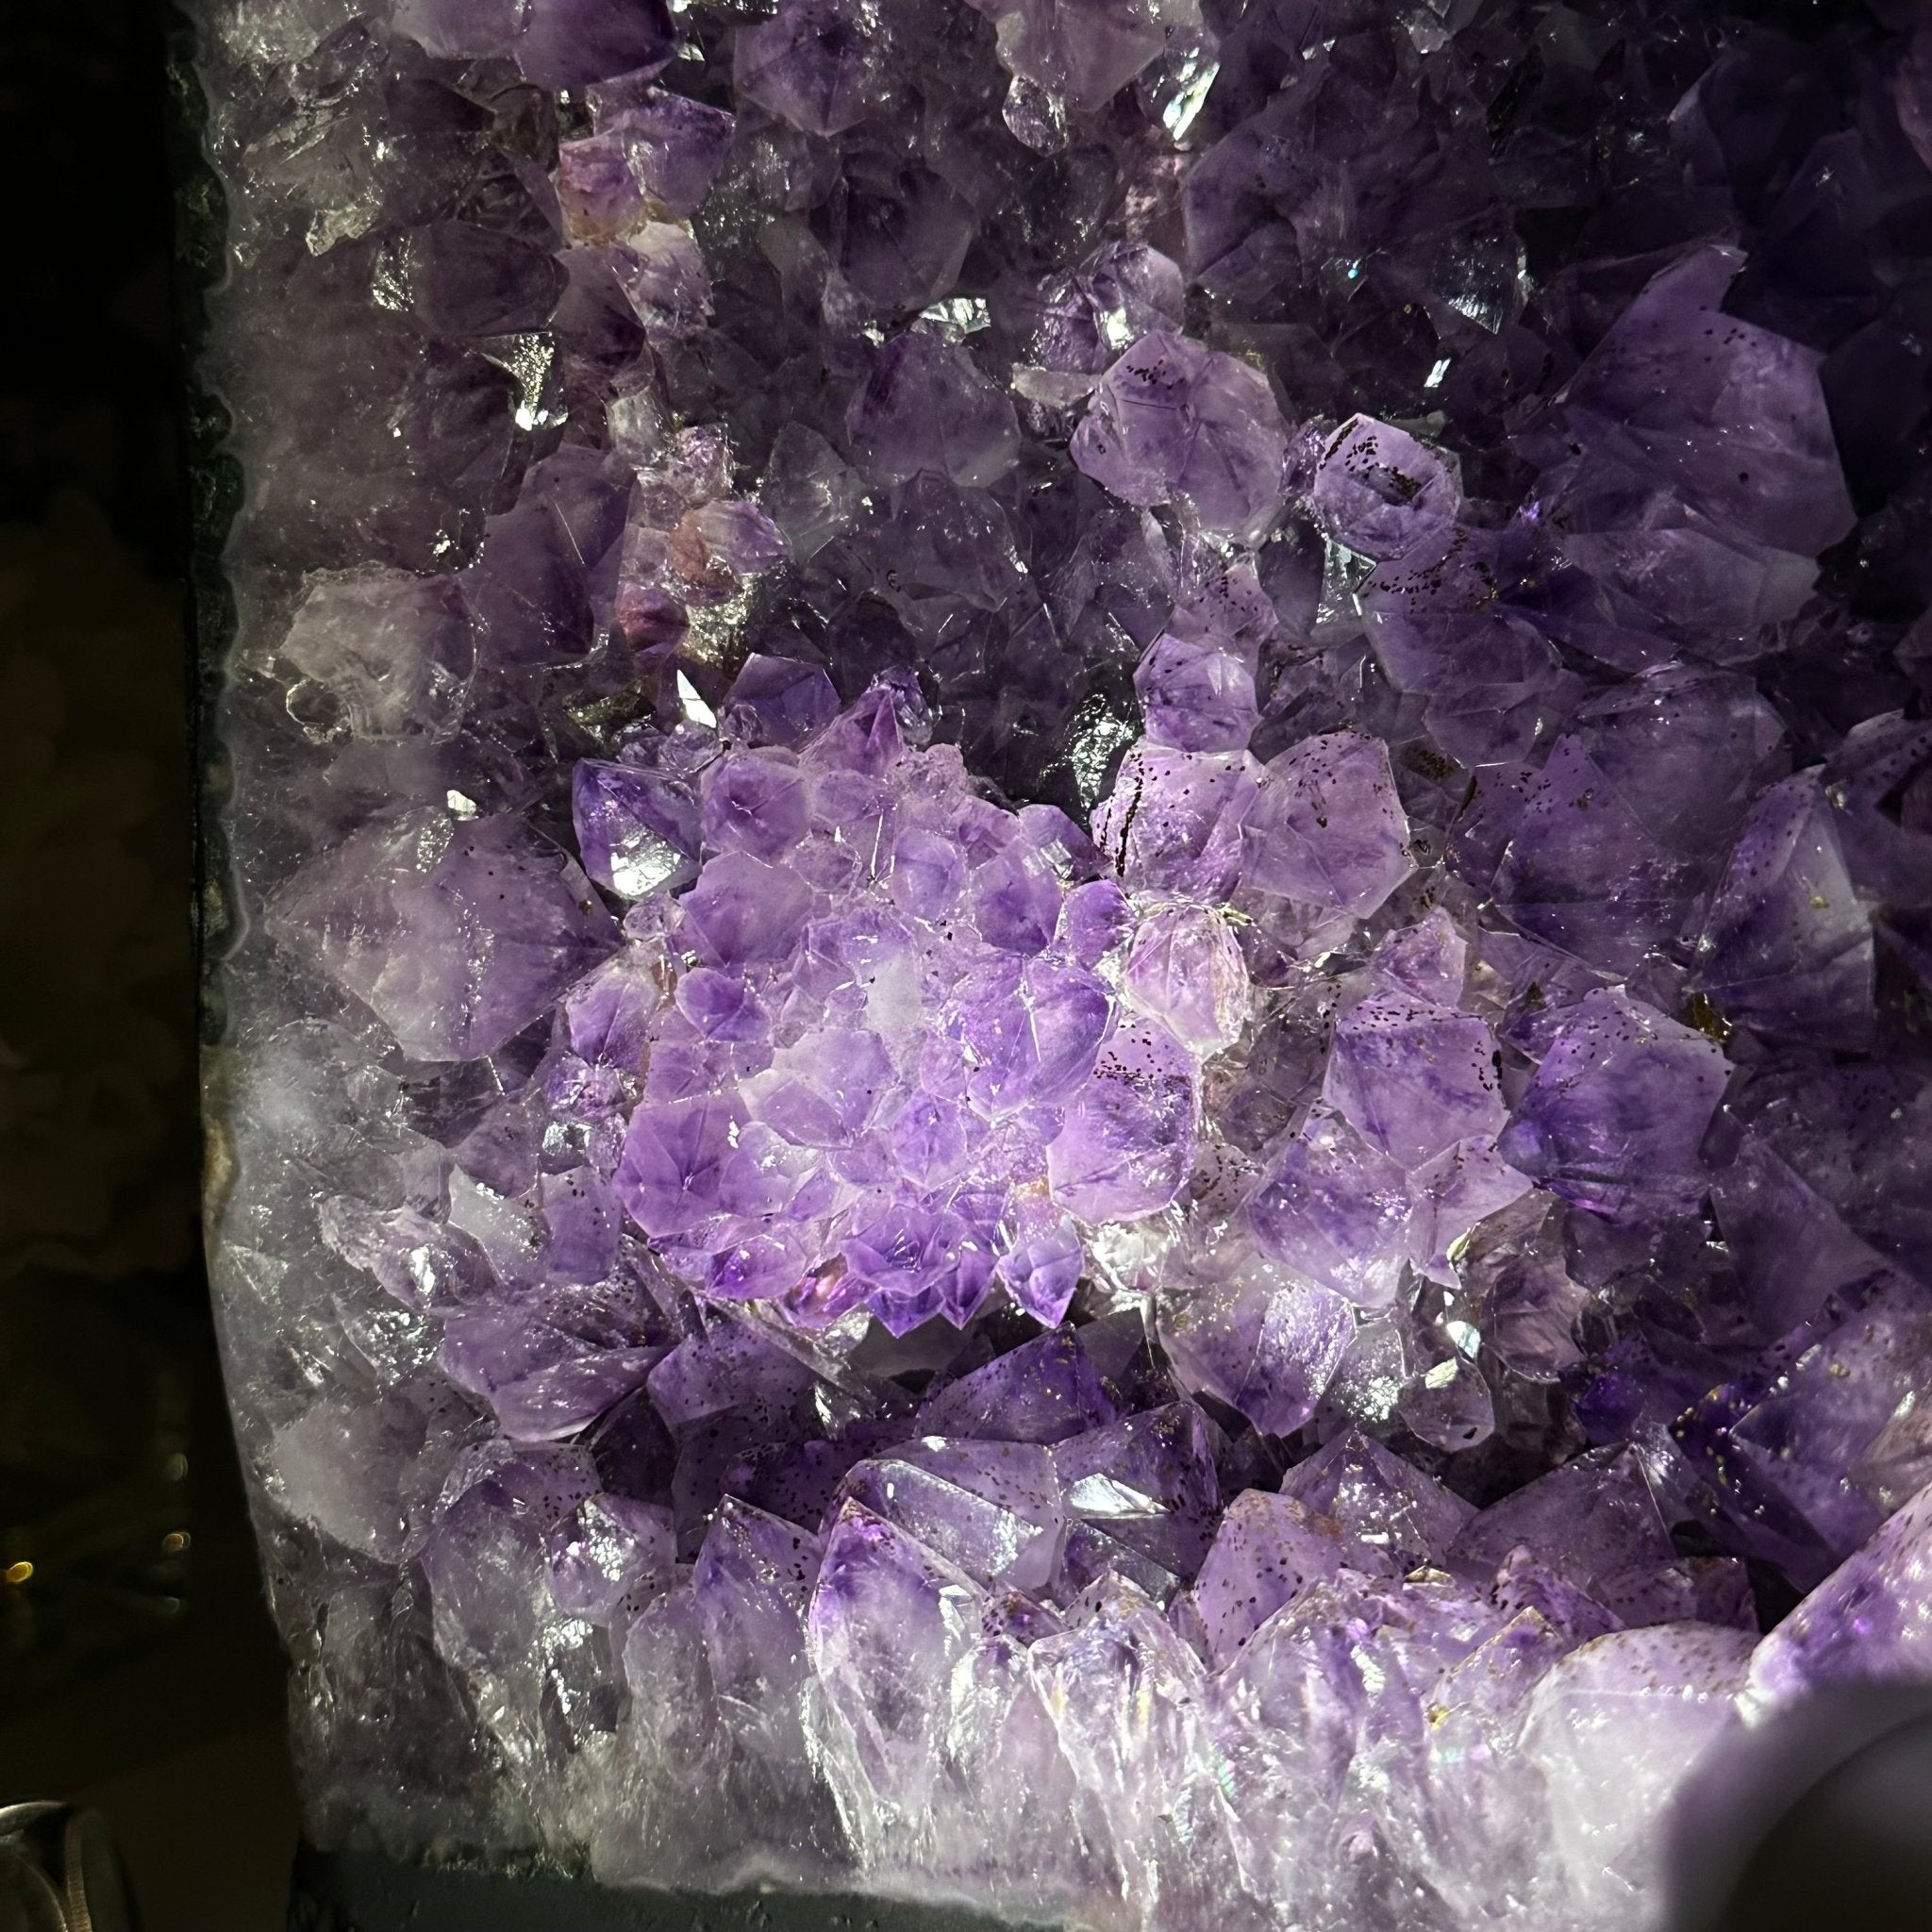 Quality Brazilian Amethyst Cathedral, 24.1 lbs & 17.9" Tall, #5601 - 1394 - Brazil GemsBrazil GemsQuality Brazilian Amethyst Cathedral, 24.1 lbs & 17.9" Tall, #5601 - 1394Cathedrals5601 - 1394